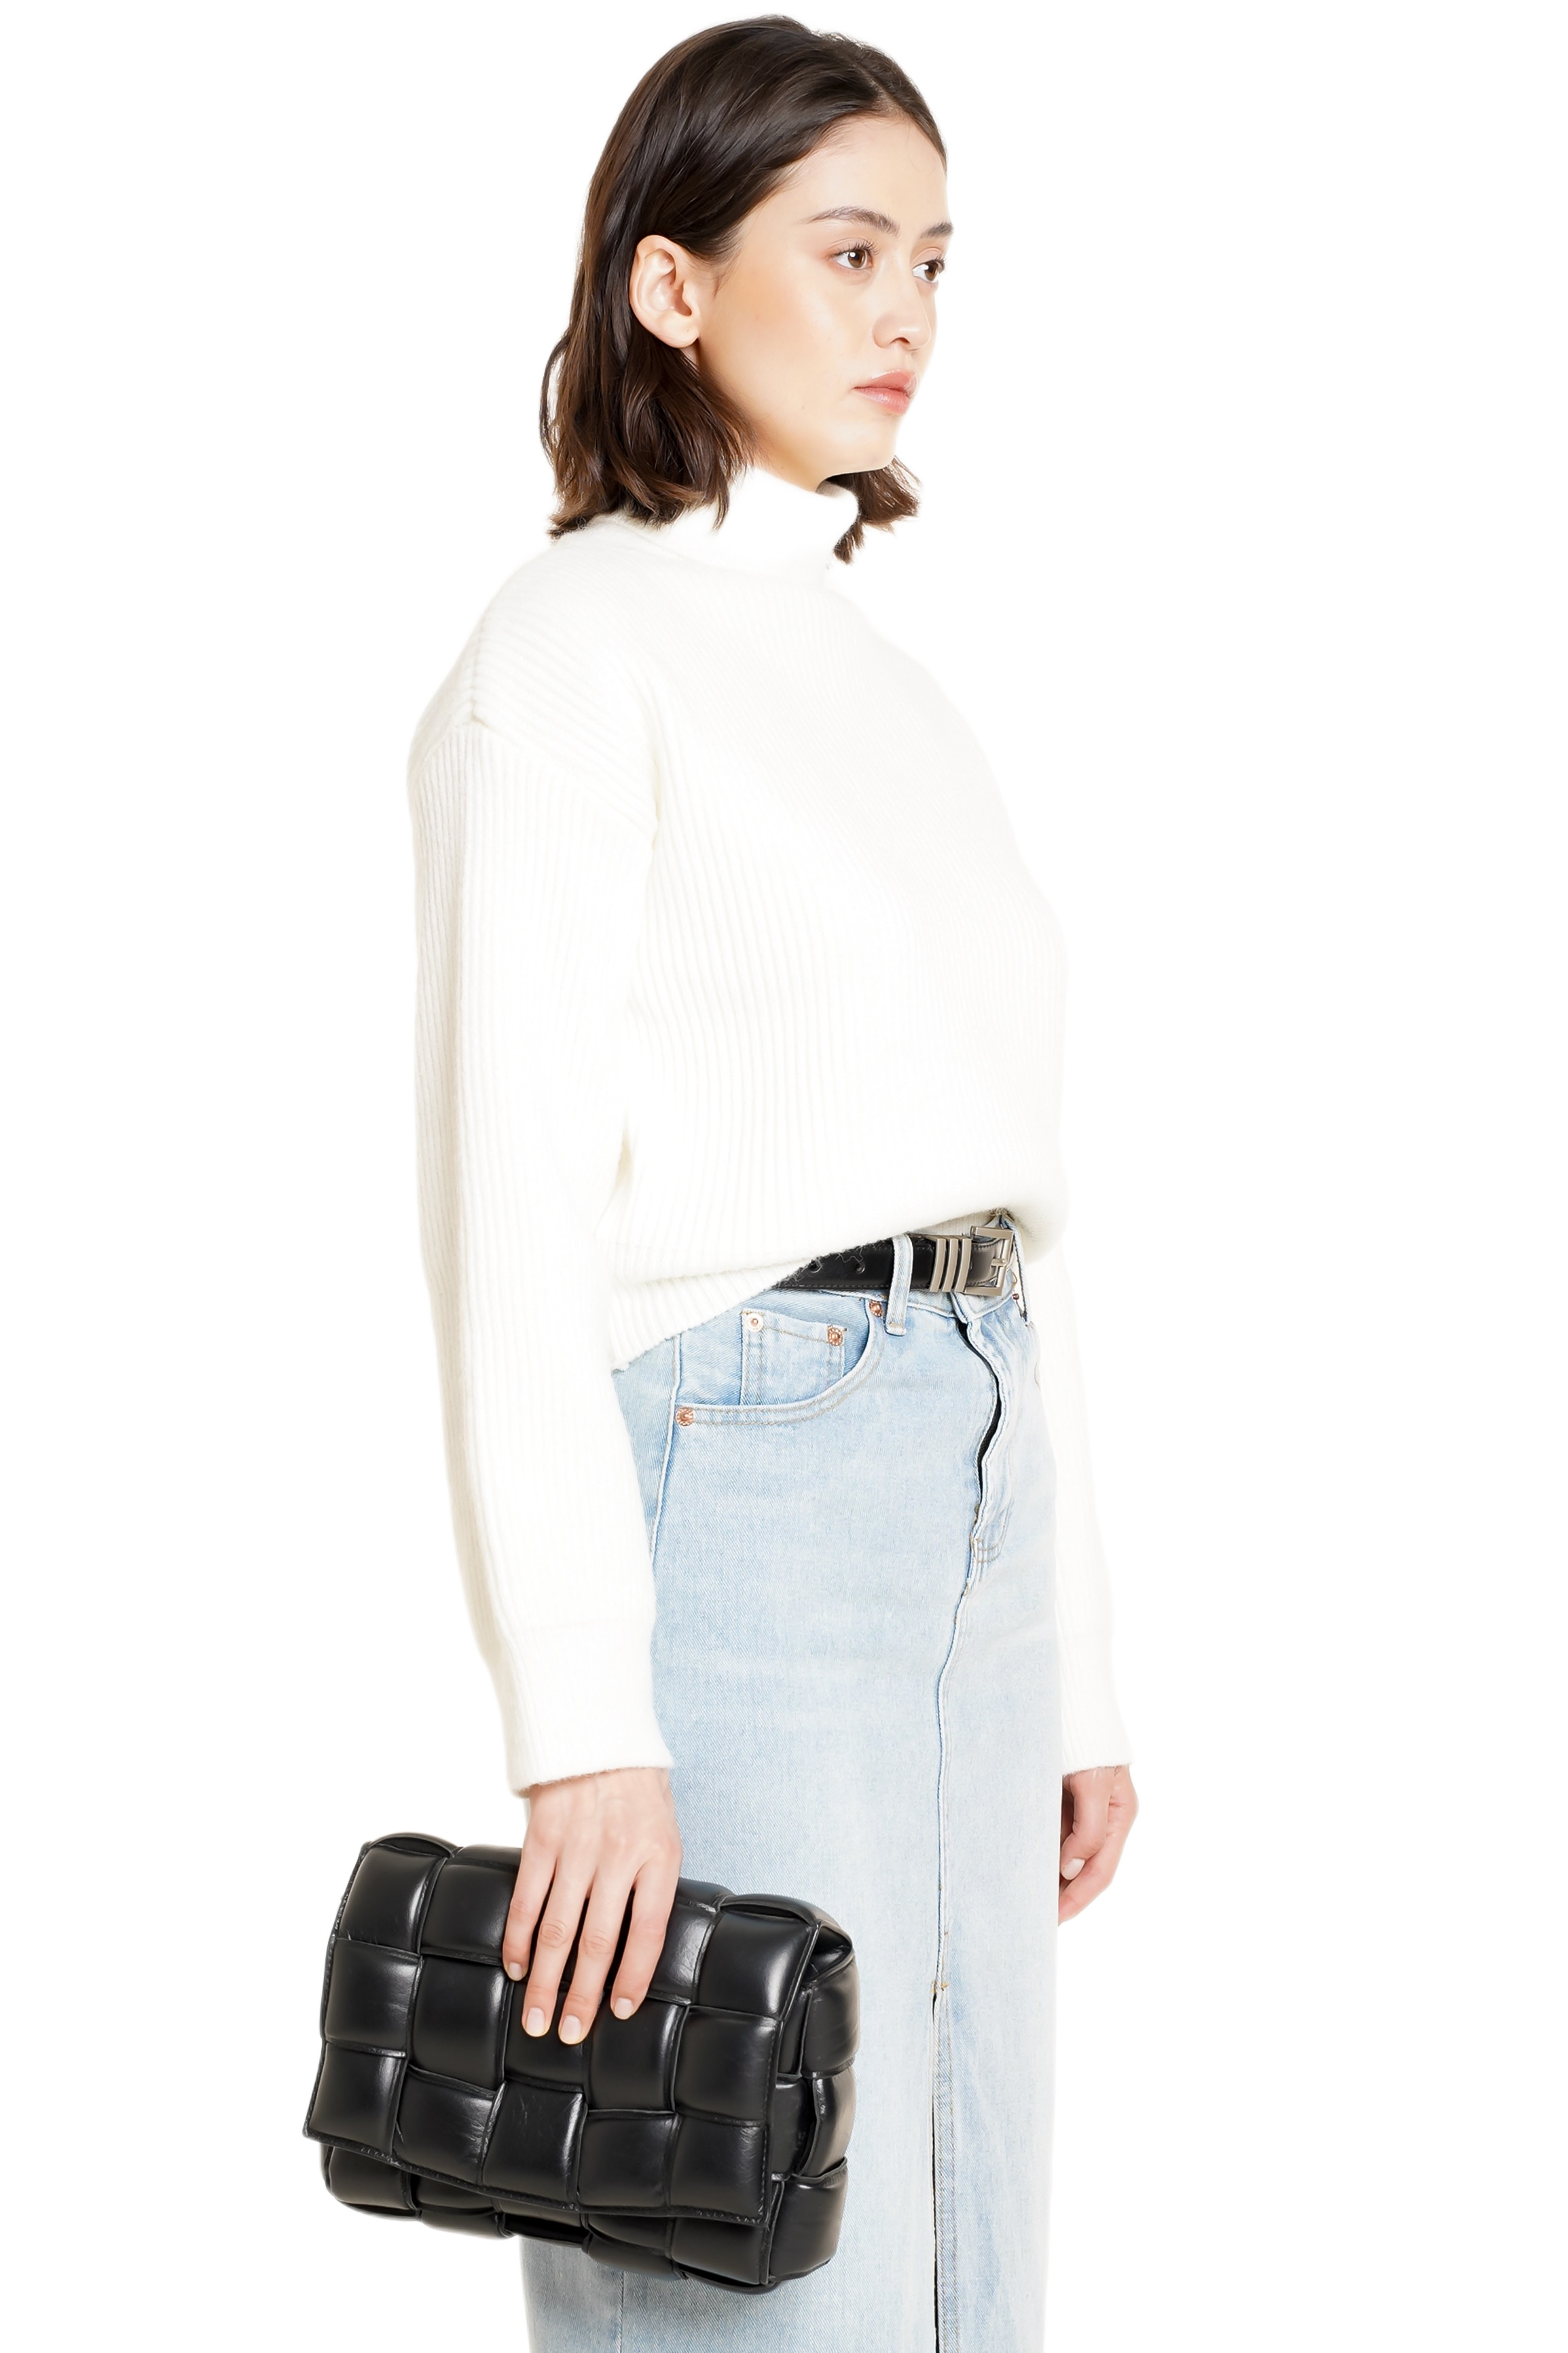 LUXE SWEATER - WHITE